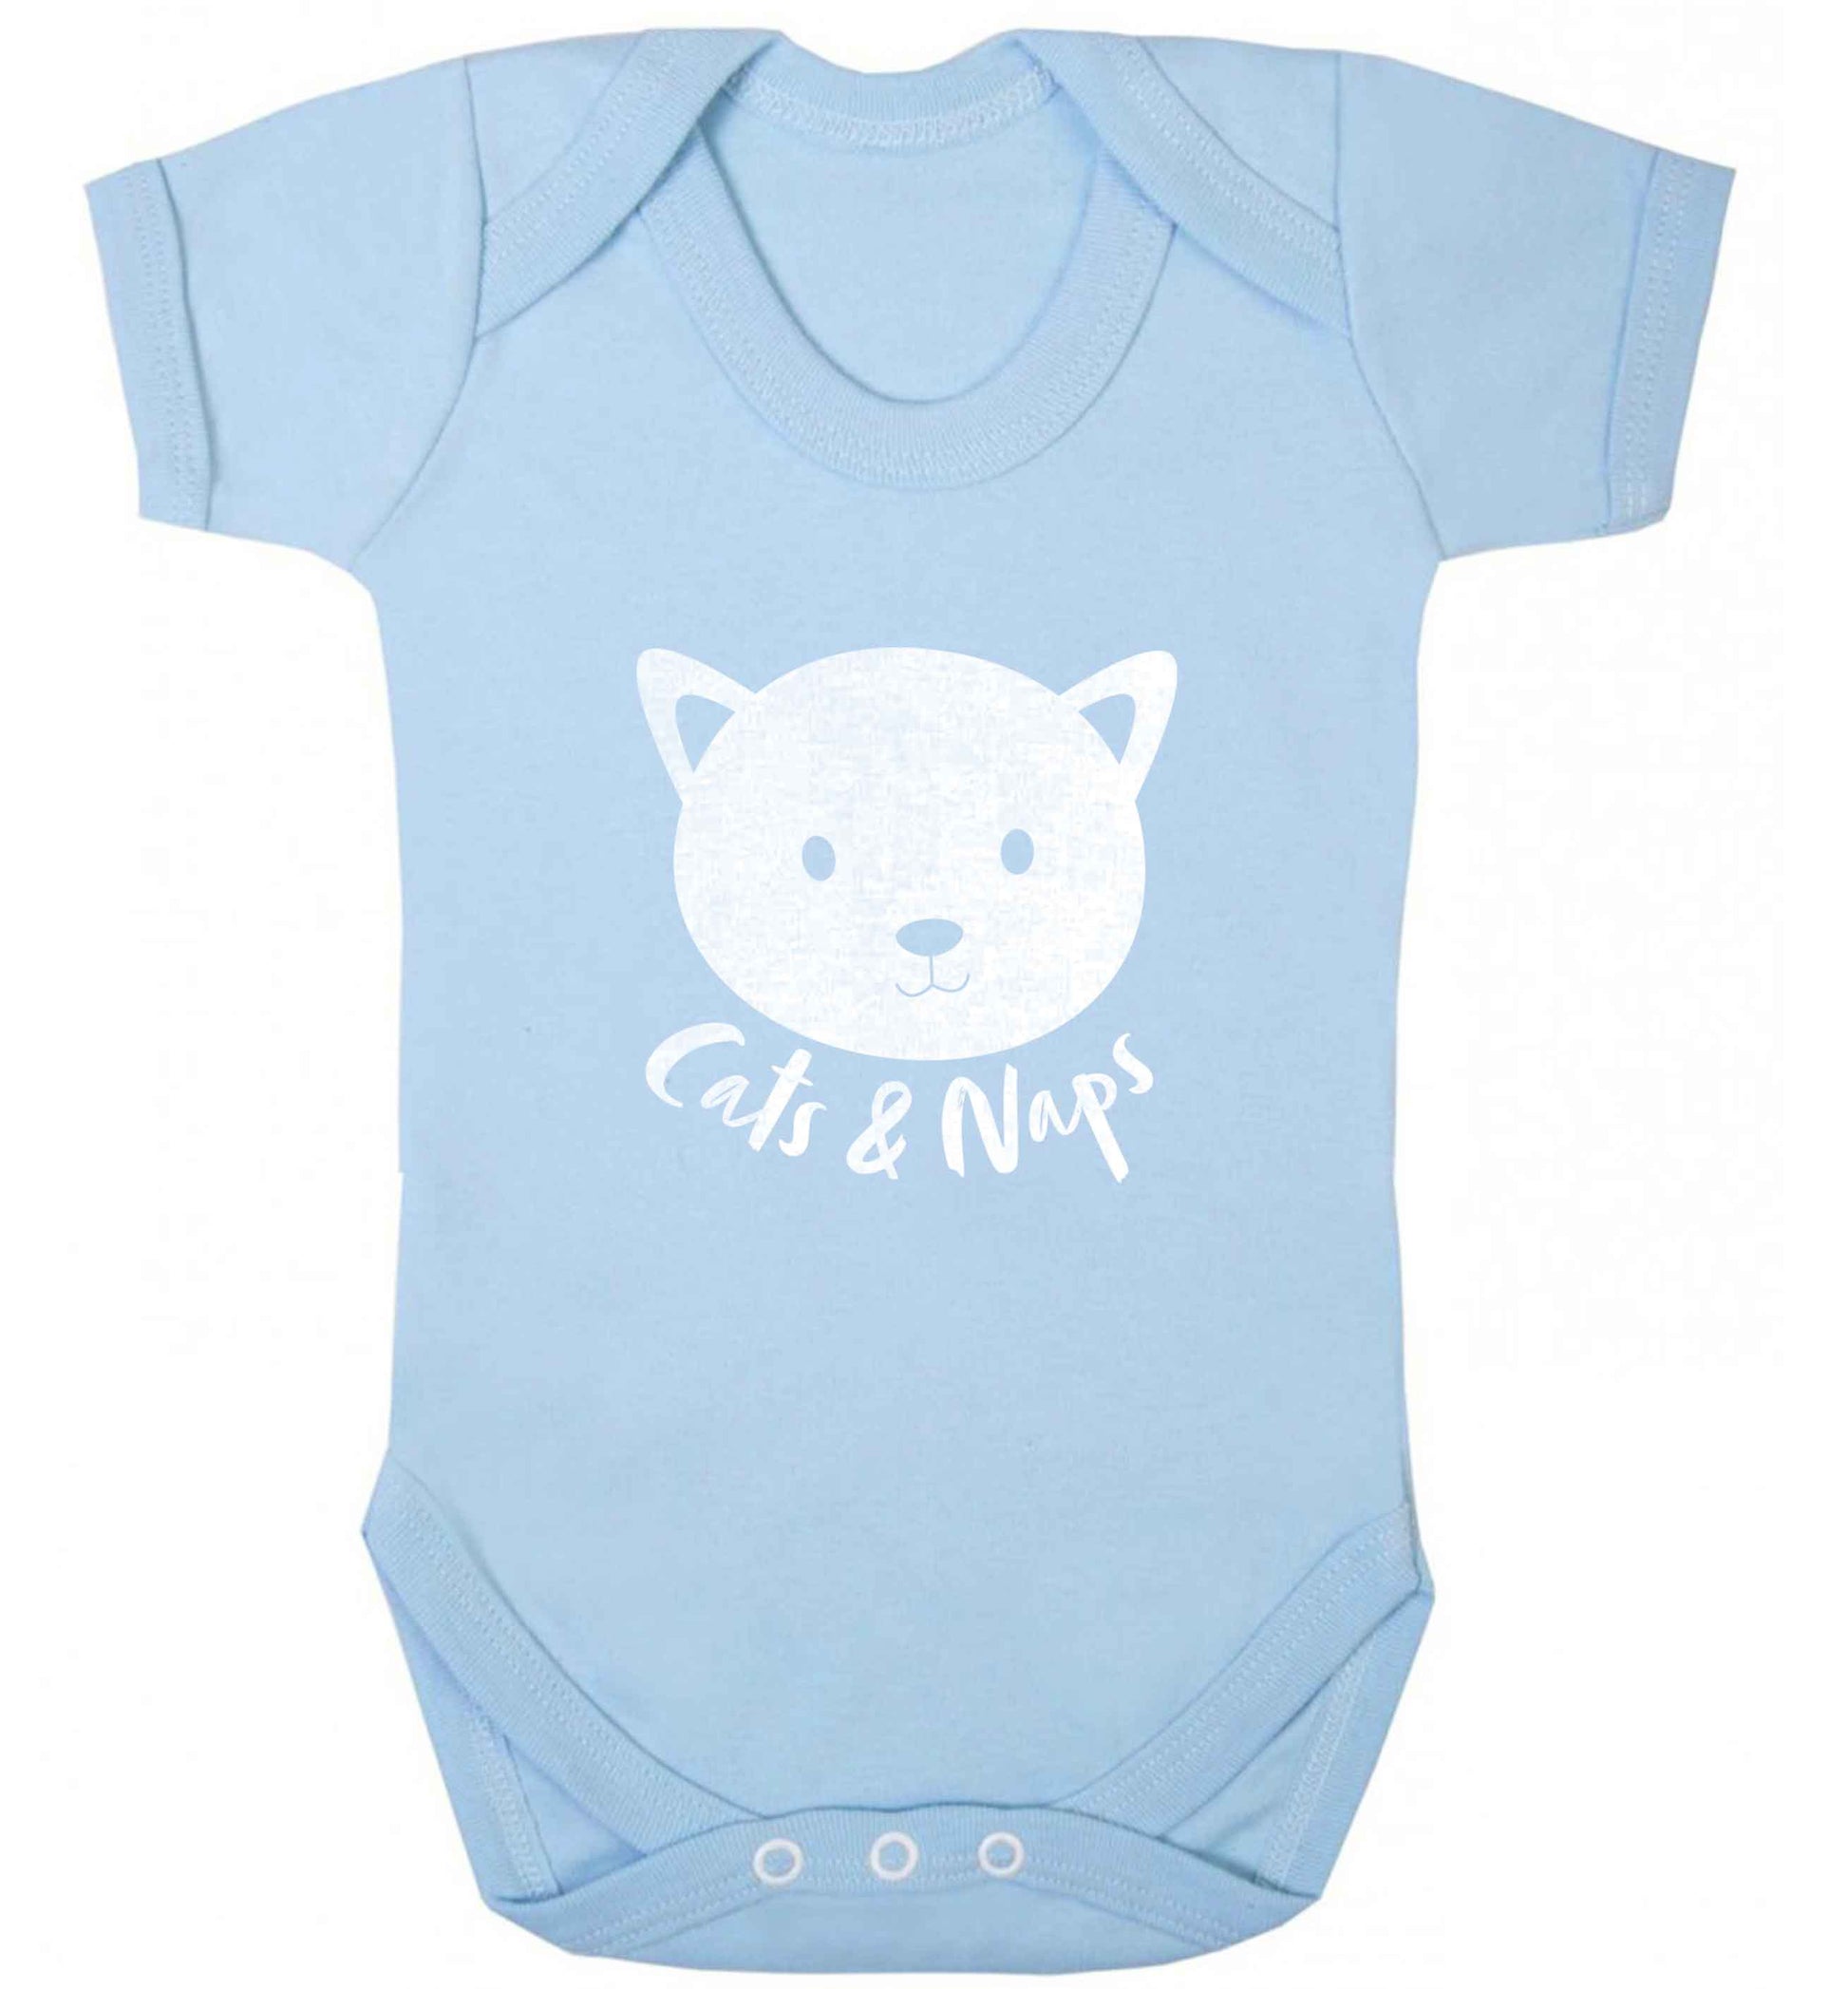 Cats and naps Kit baby vest pale blue 18-24 months